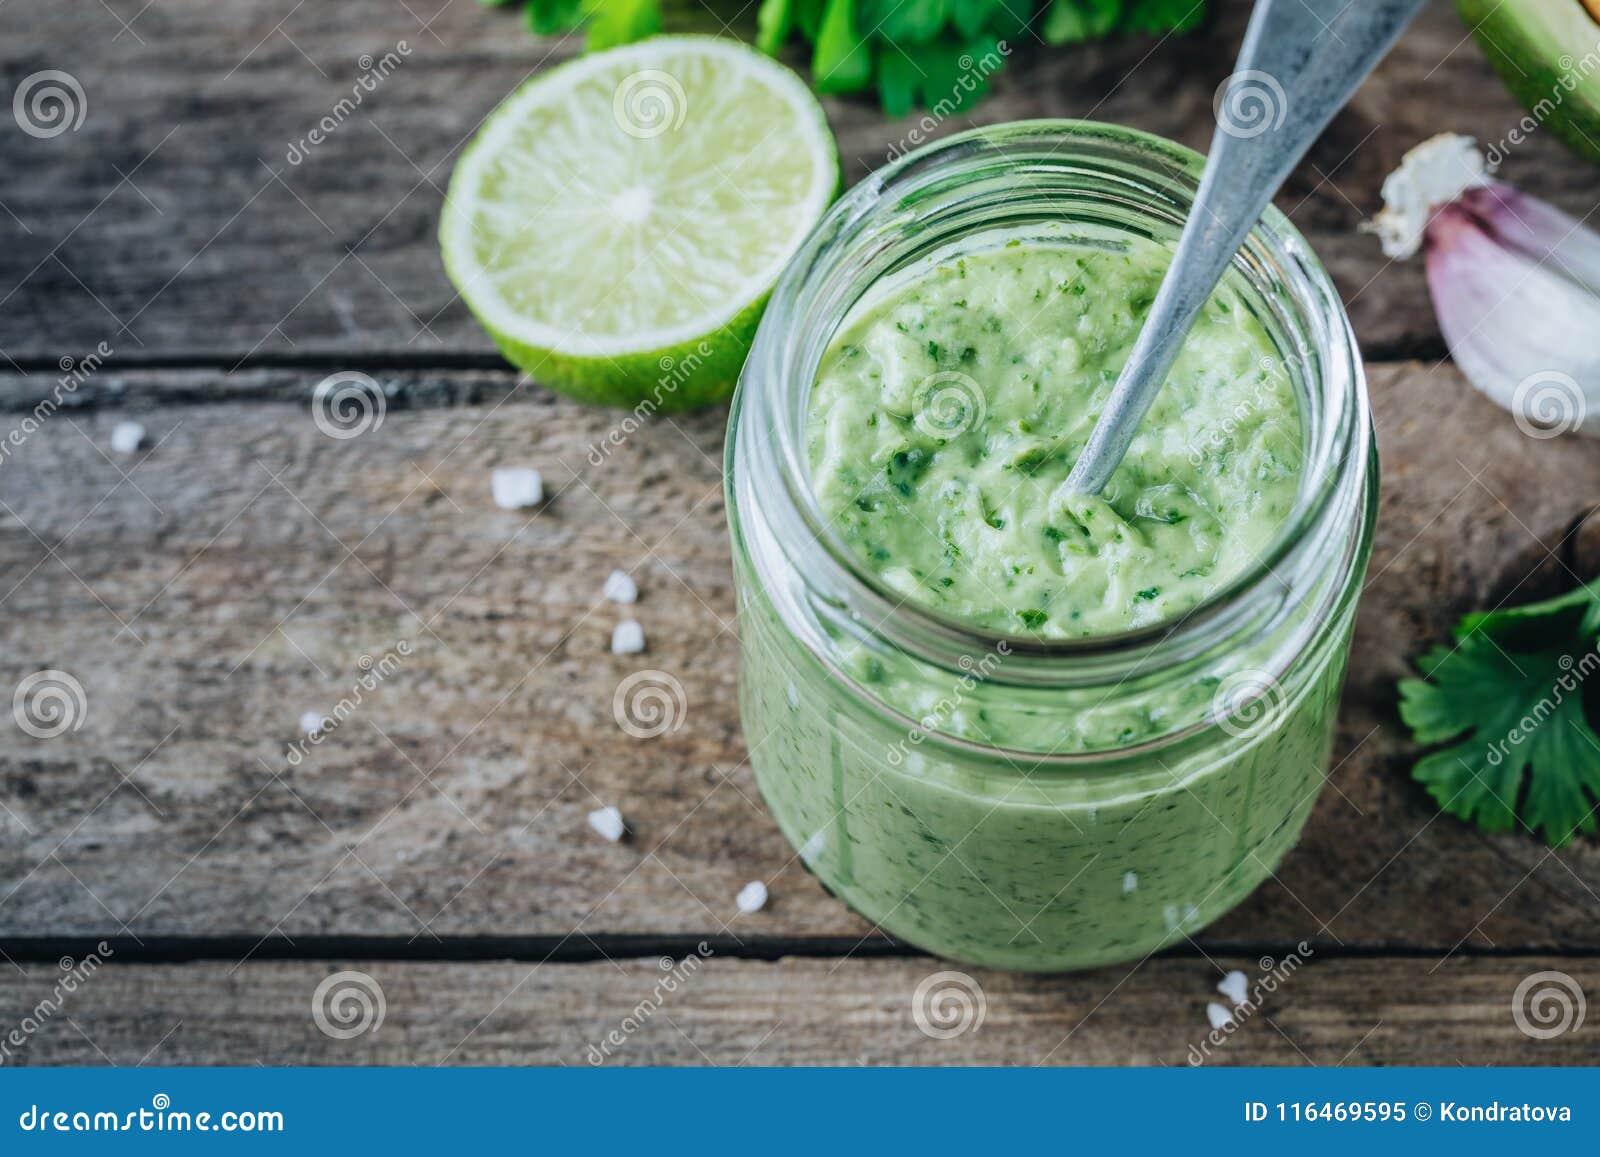 Green Salad Dressing with Avocado, Lime and Cilantro in a Glass Jar ...